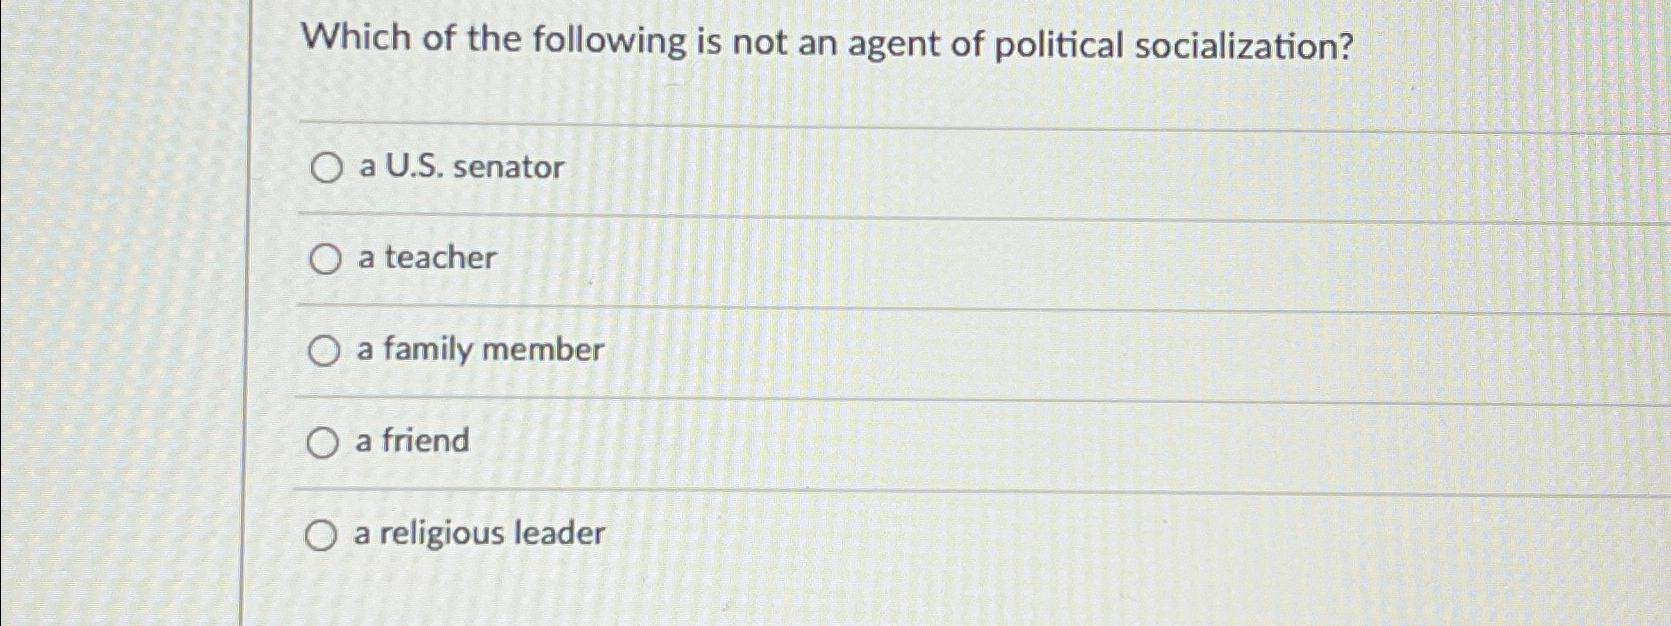 which of the following is an agent of political socialization